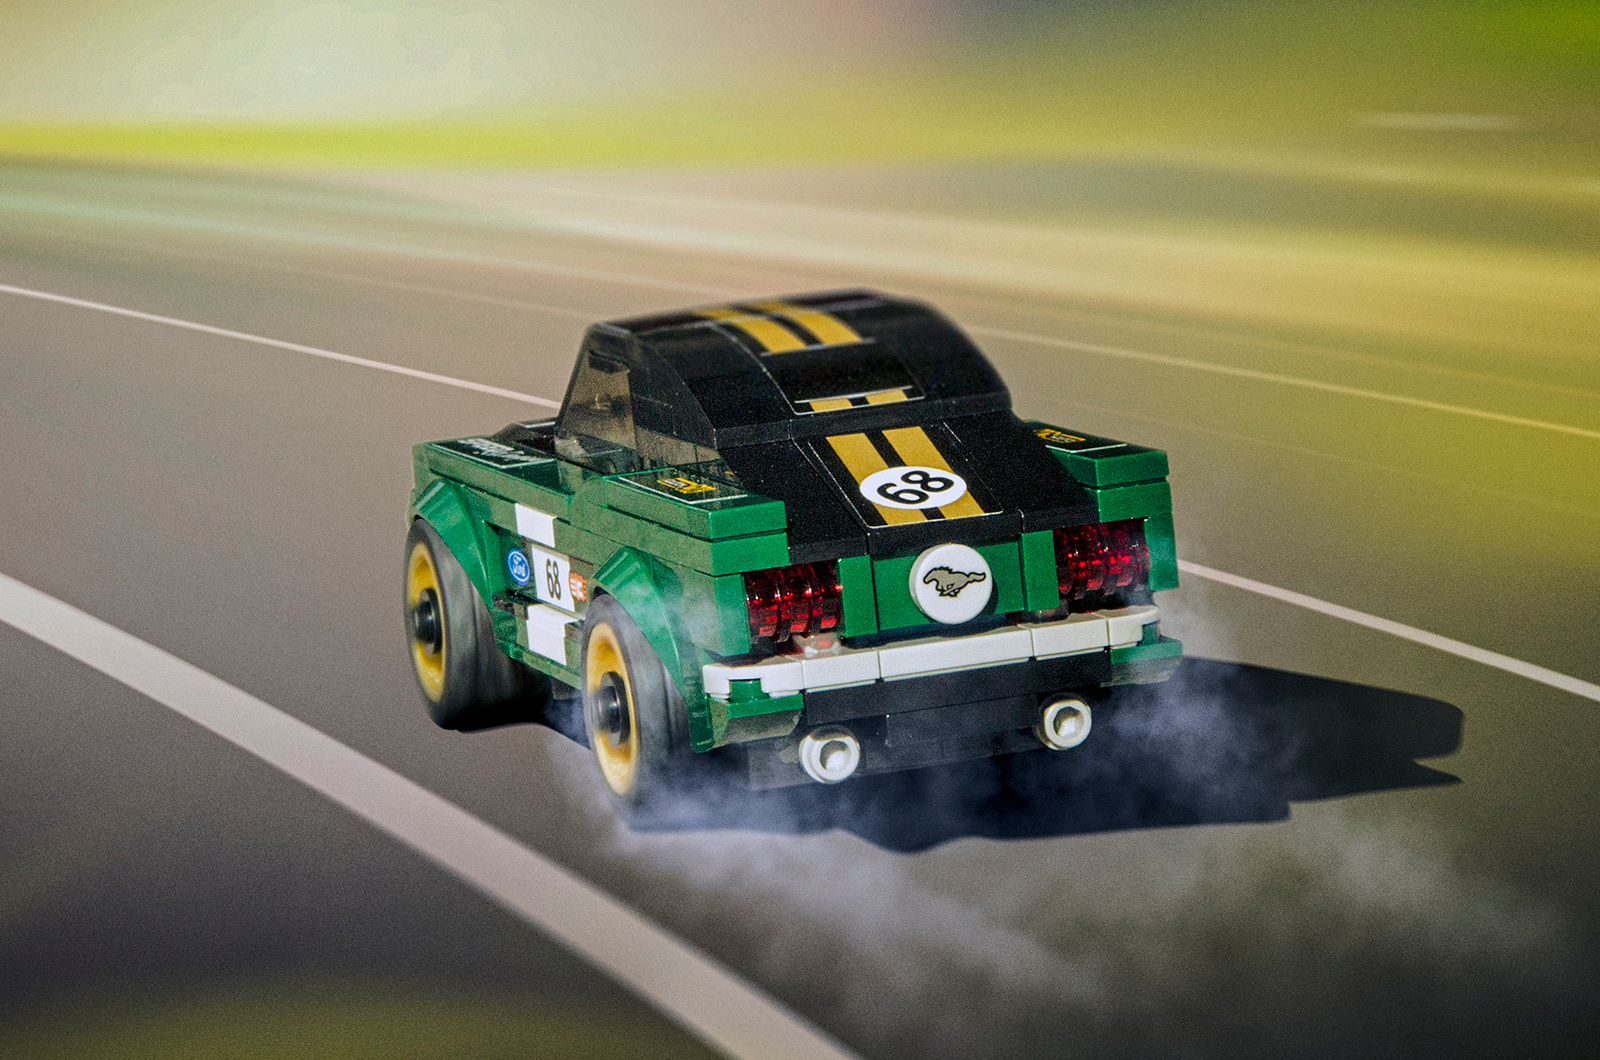 Lego's '68 Mustang Fastback is a brilliant blocky classic